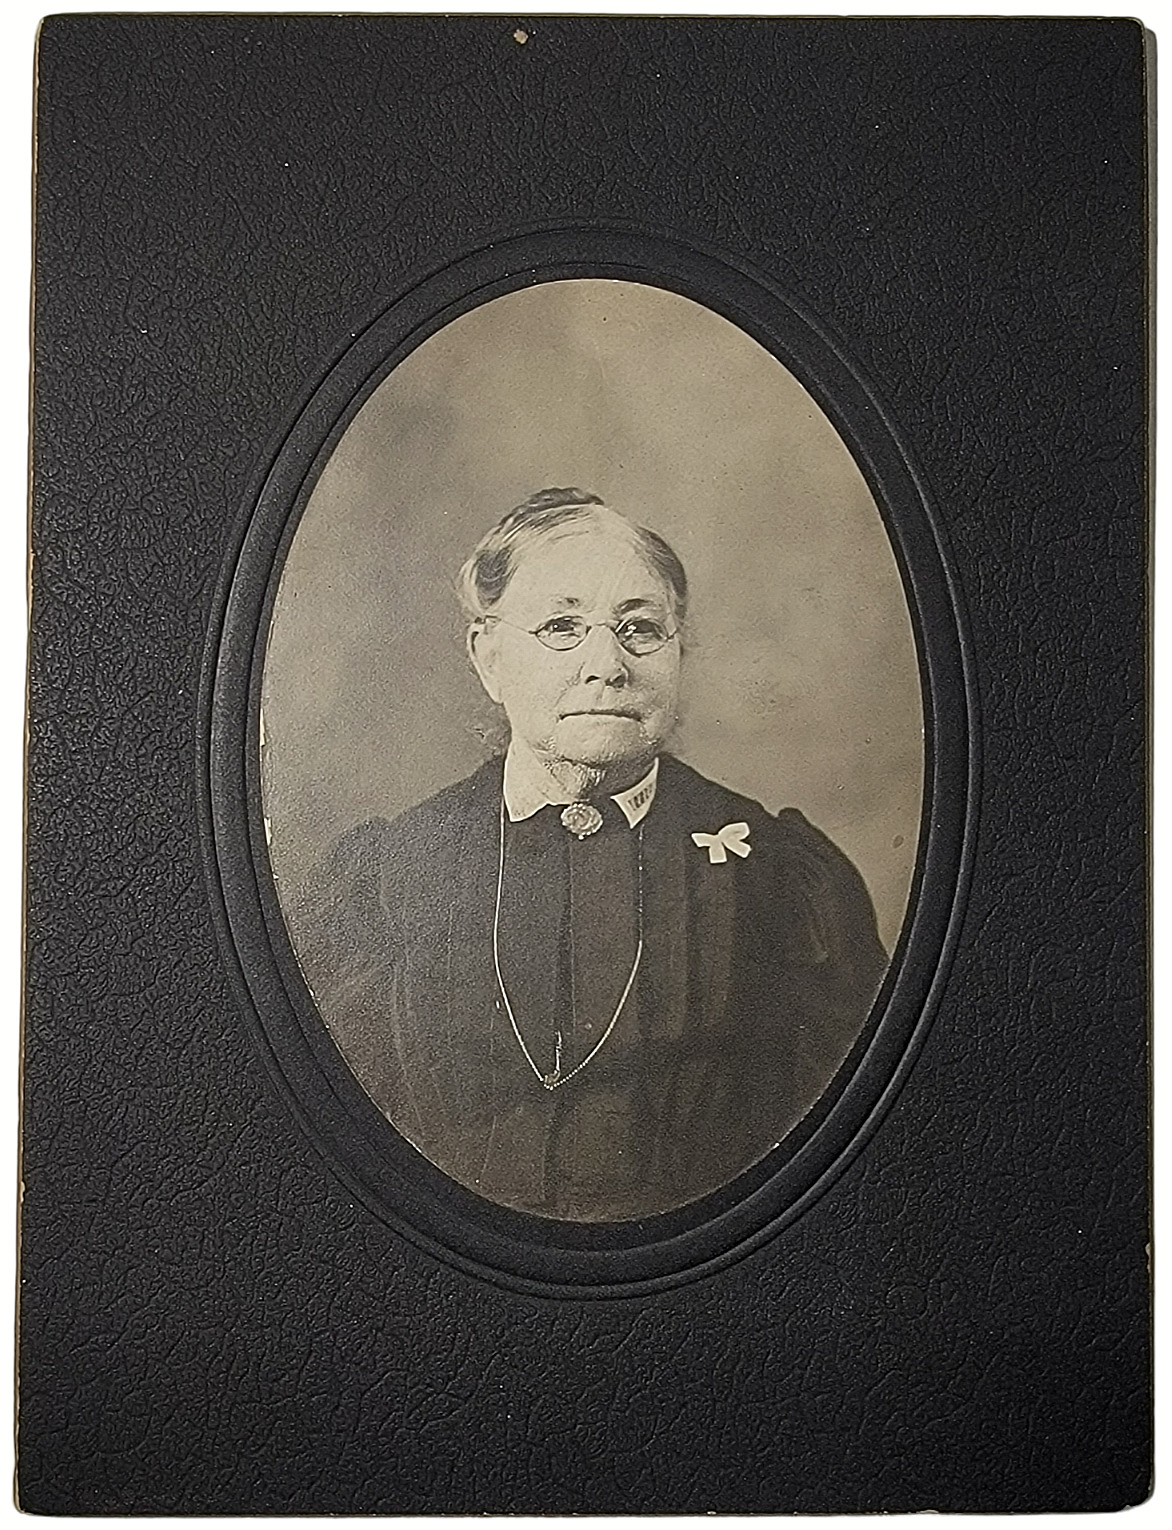 Cabinet Card Antique Photograph Elderly Woman In Black Dress Sepia Black Oval